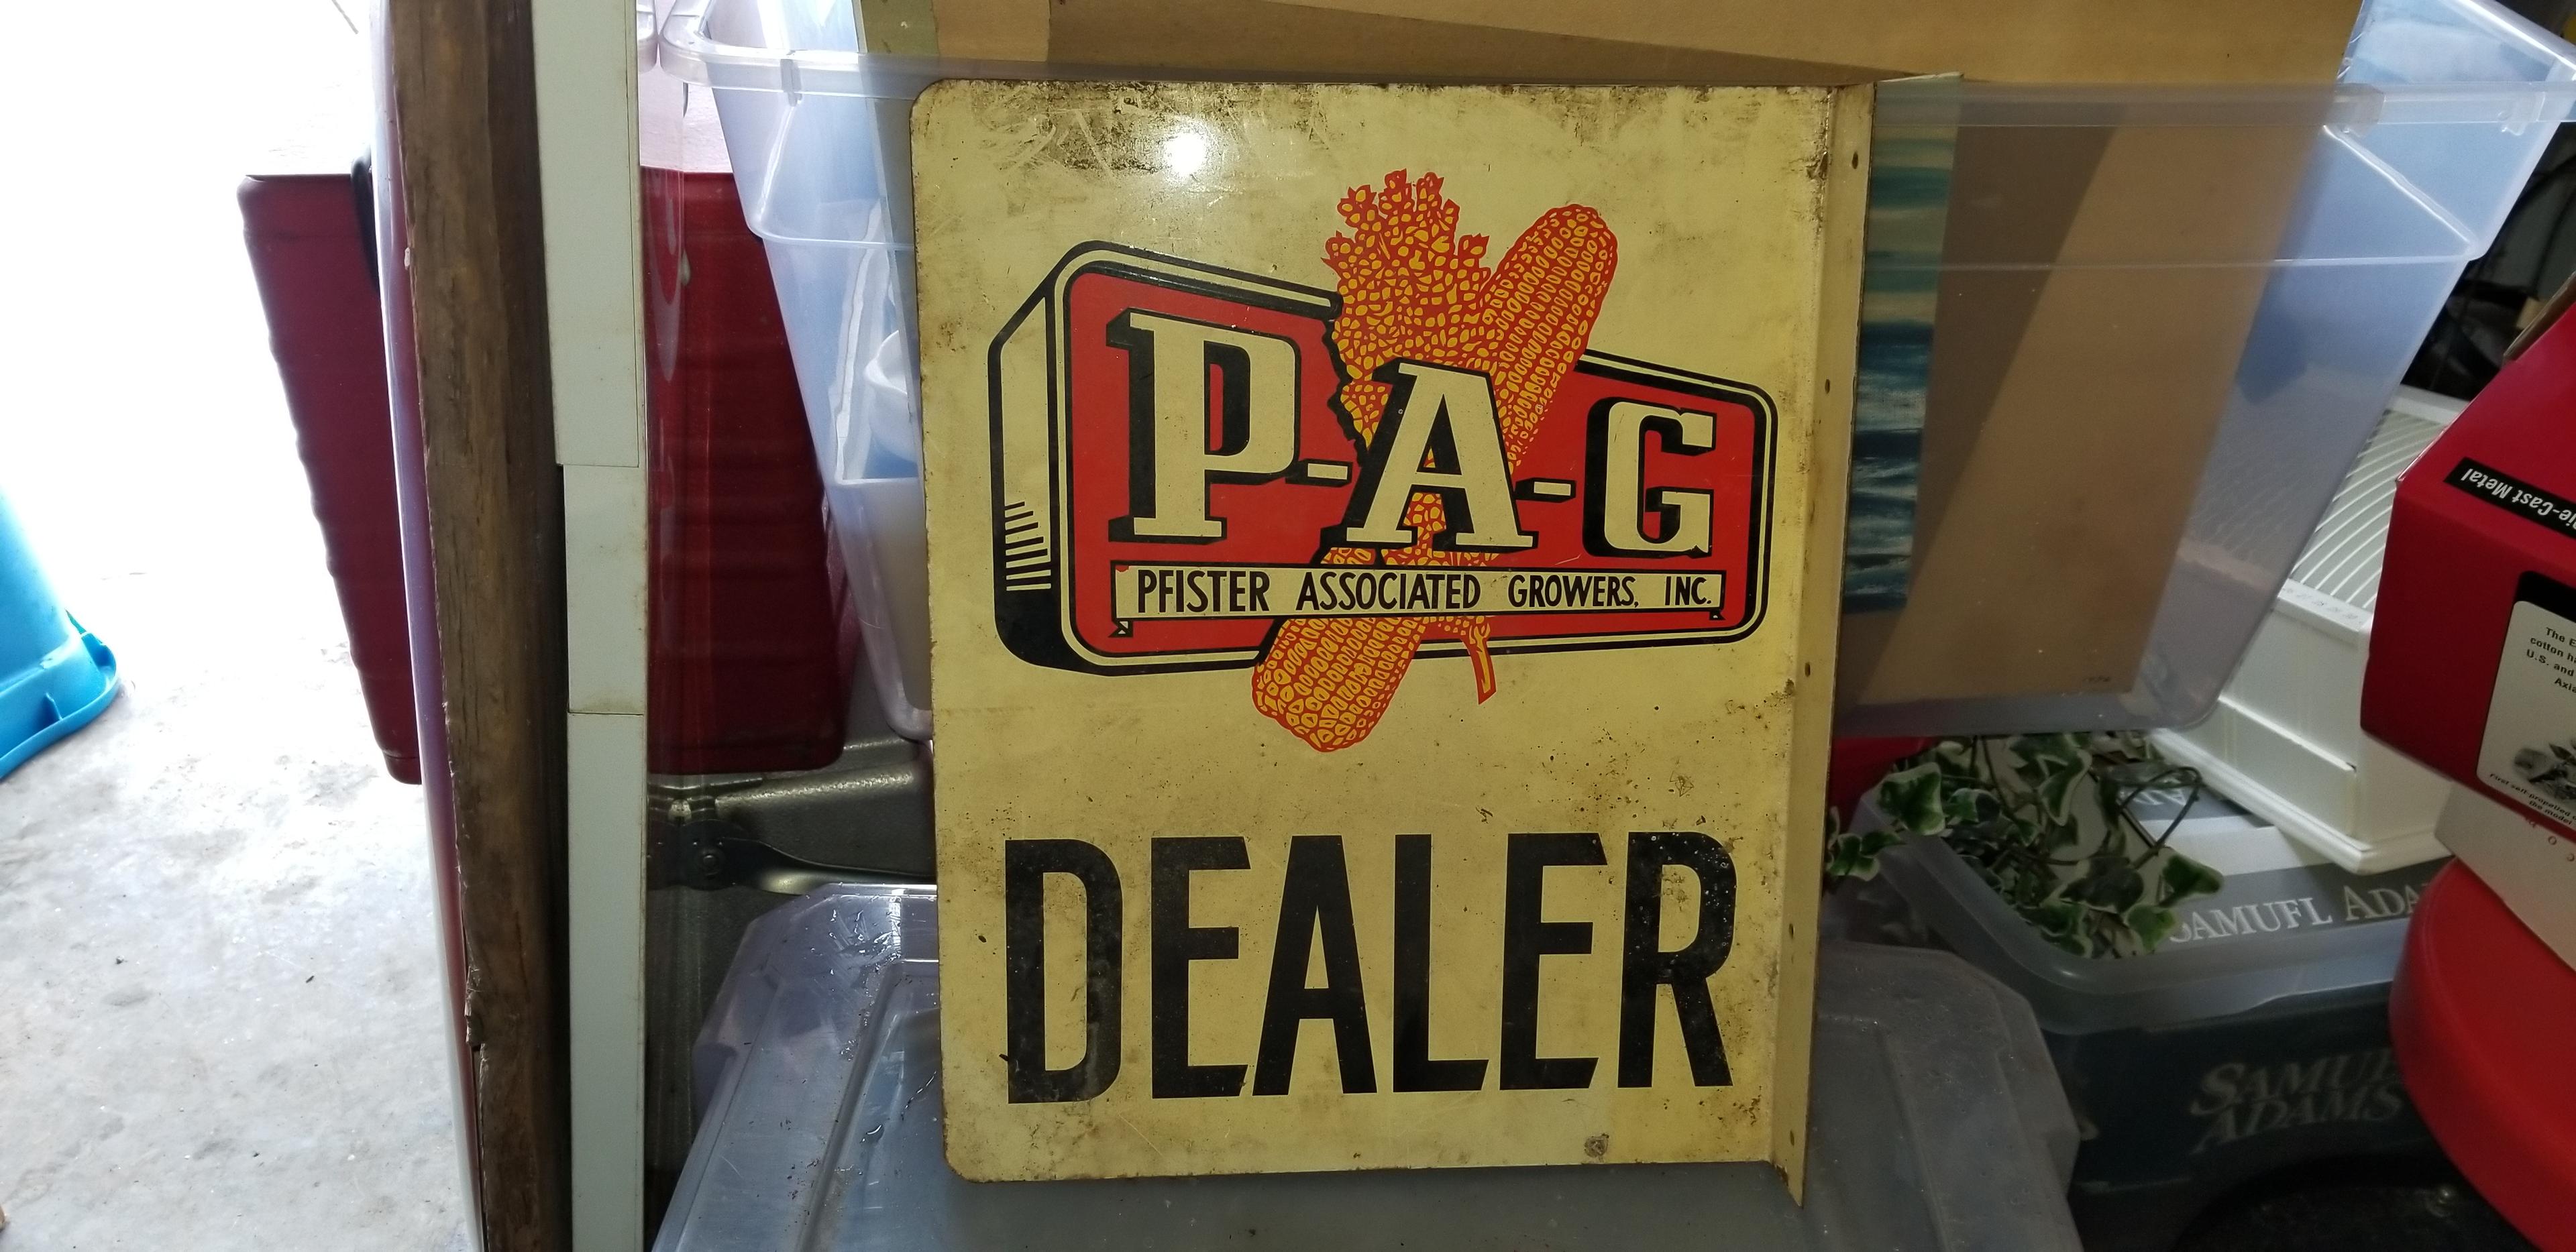 P-A-G PFISTER GROWERS DEALER DOUBLE SIDED METAL SIGN